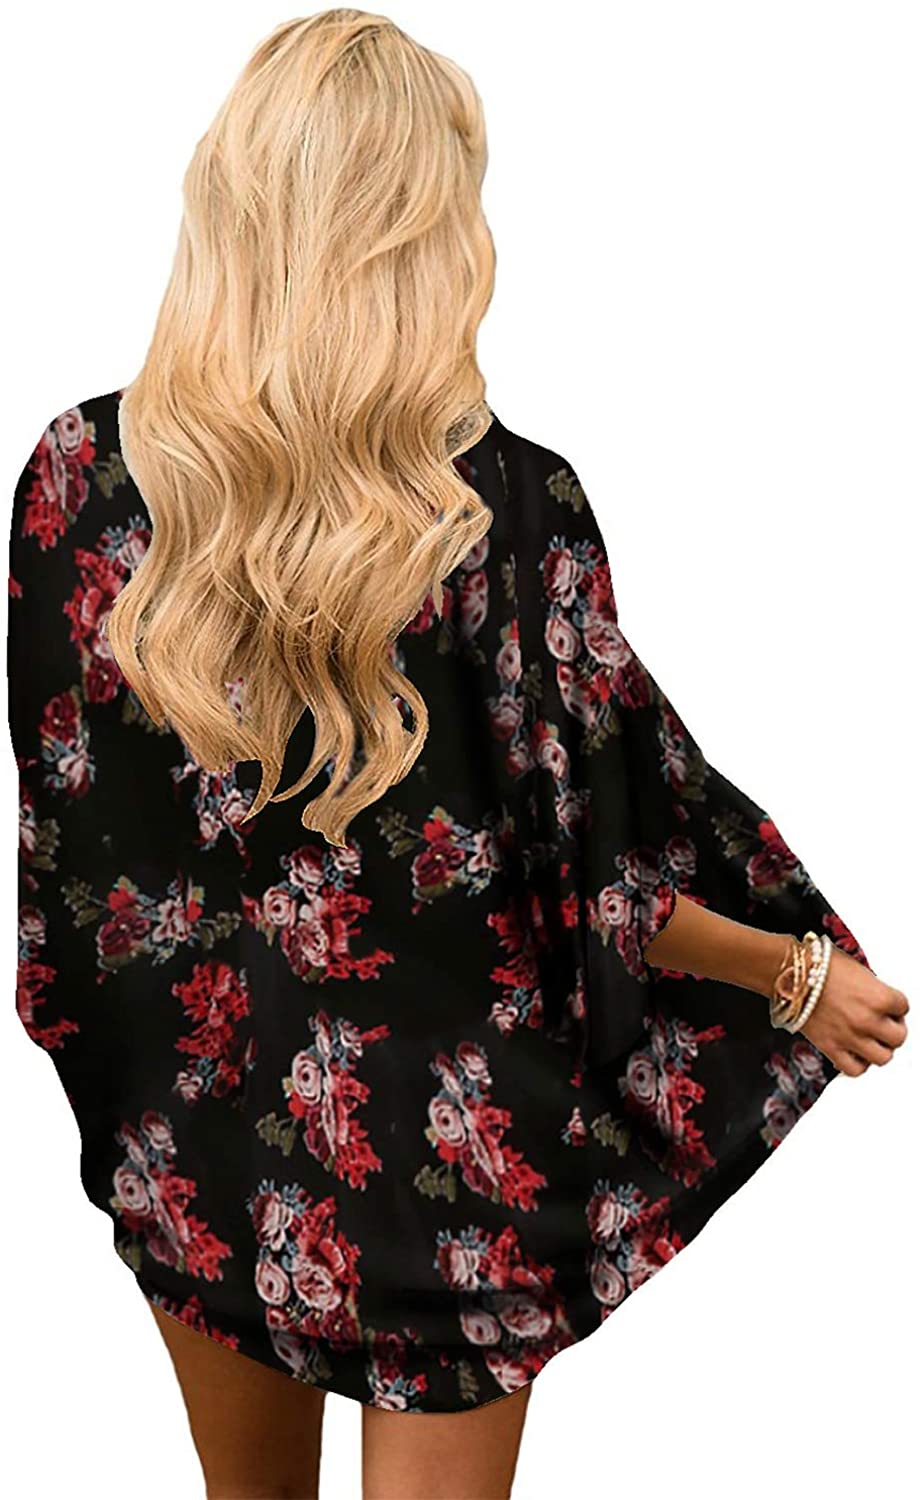 Haute Edition Women's Lightweight Summer Kimono Cardigan Cover Up in Leopard and Floral Daily Haute